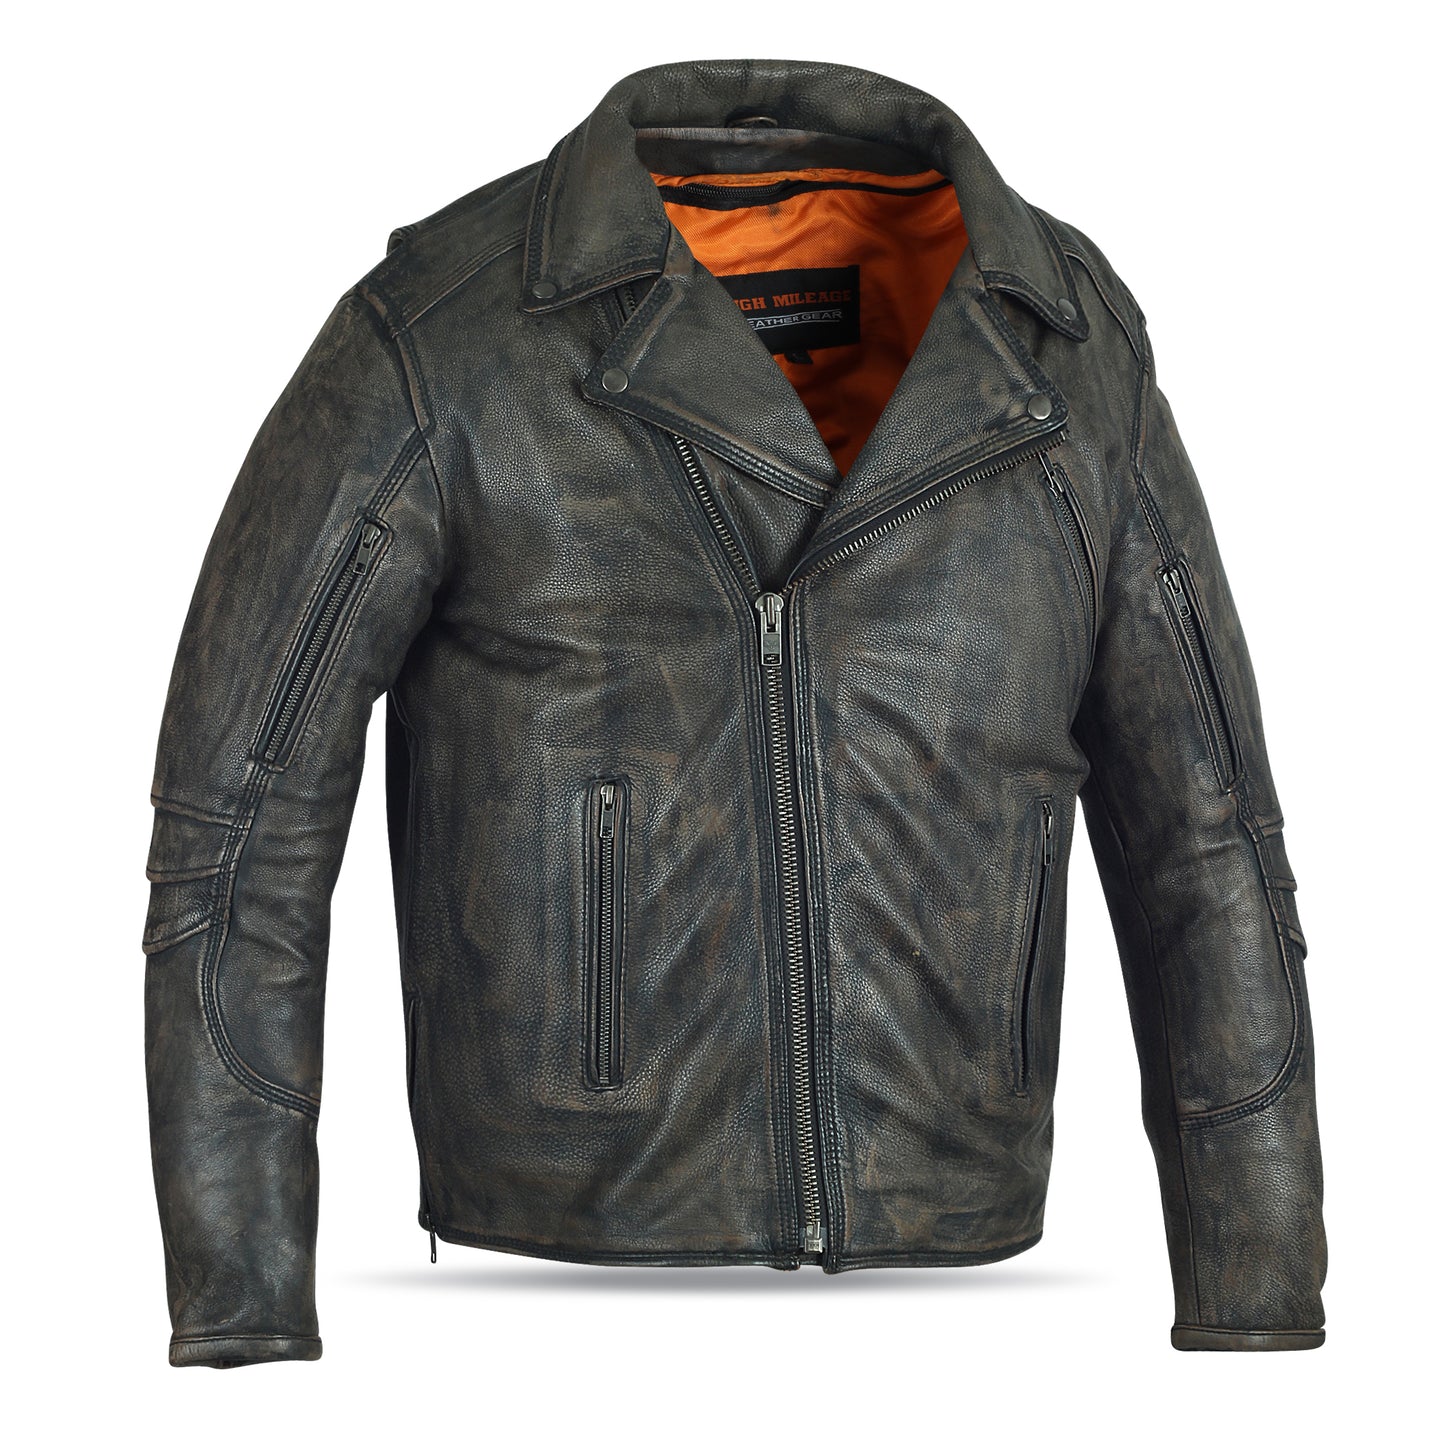 MEN'S POLICE STYLE DISTRESSED BROWN LEATHER JACKET